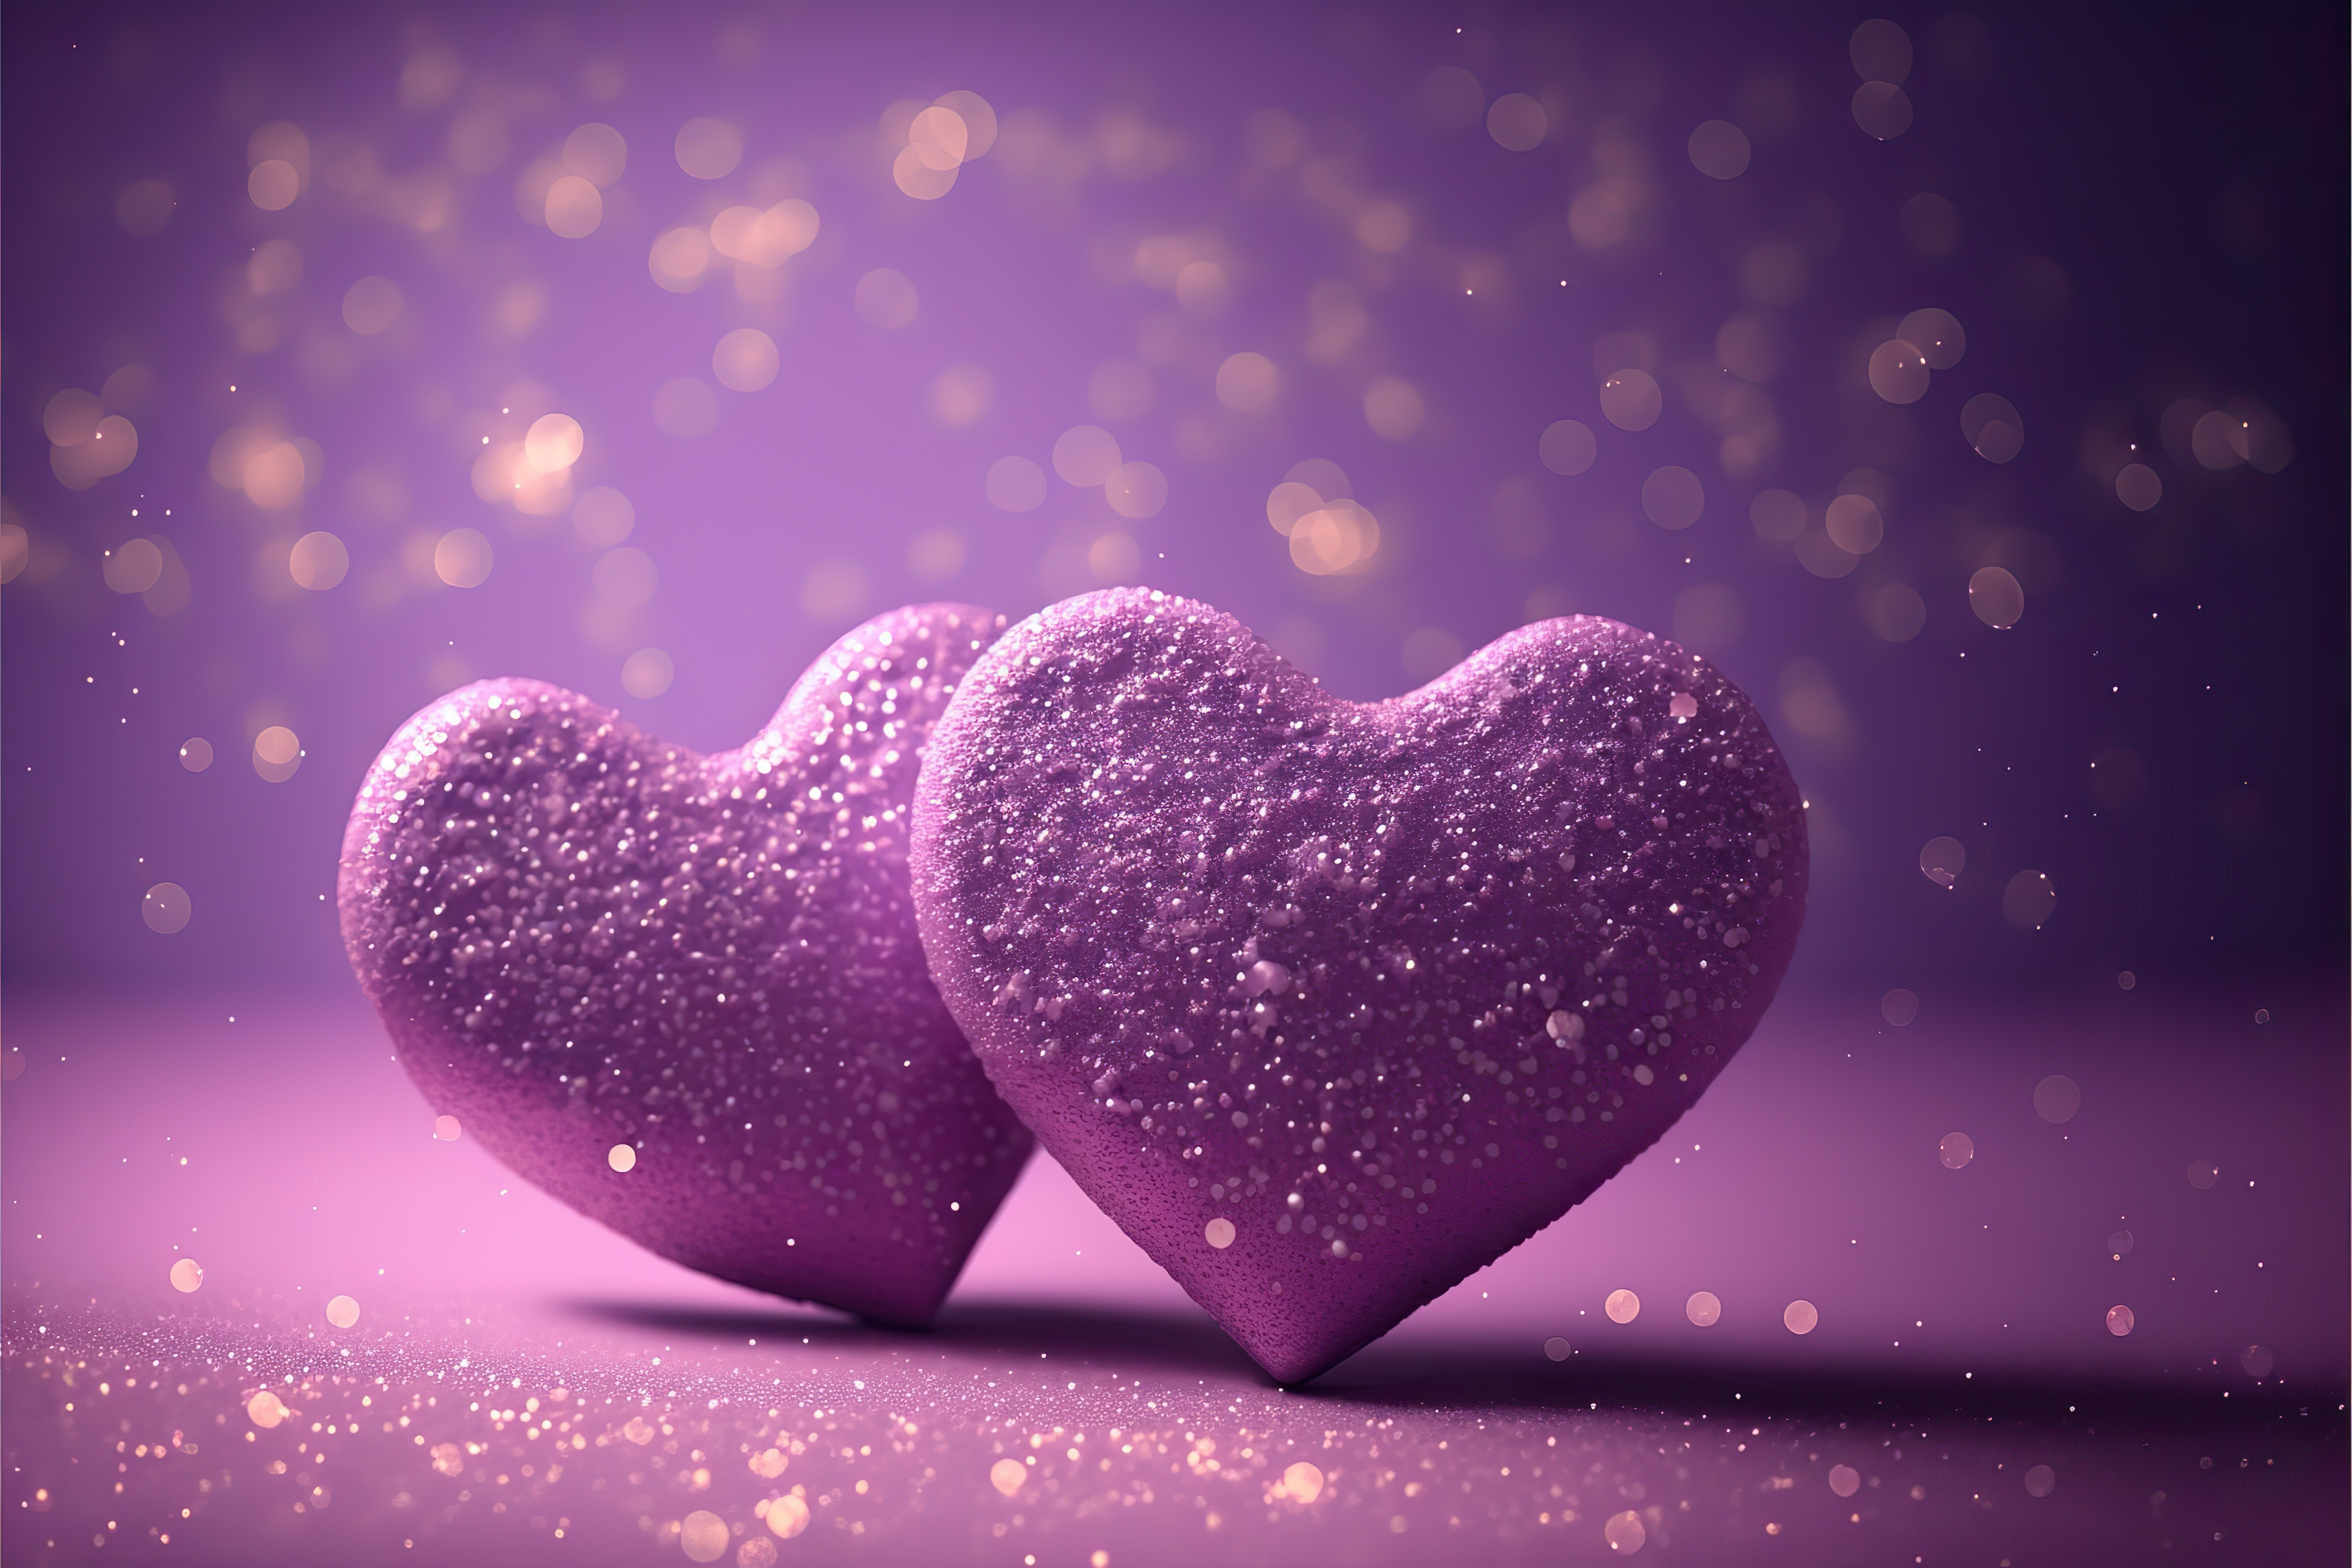 Two soft purple hearts on violet bokeh background